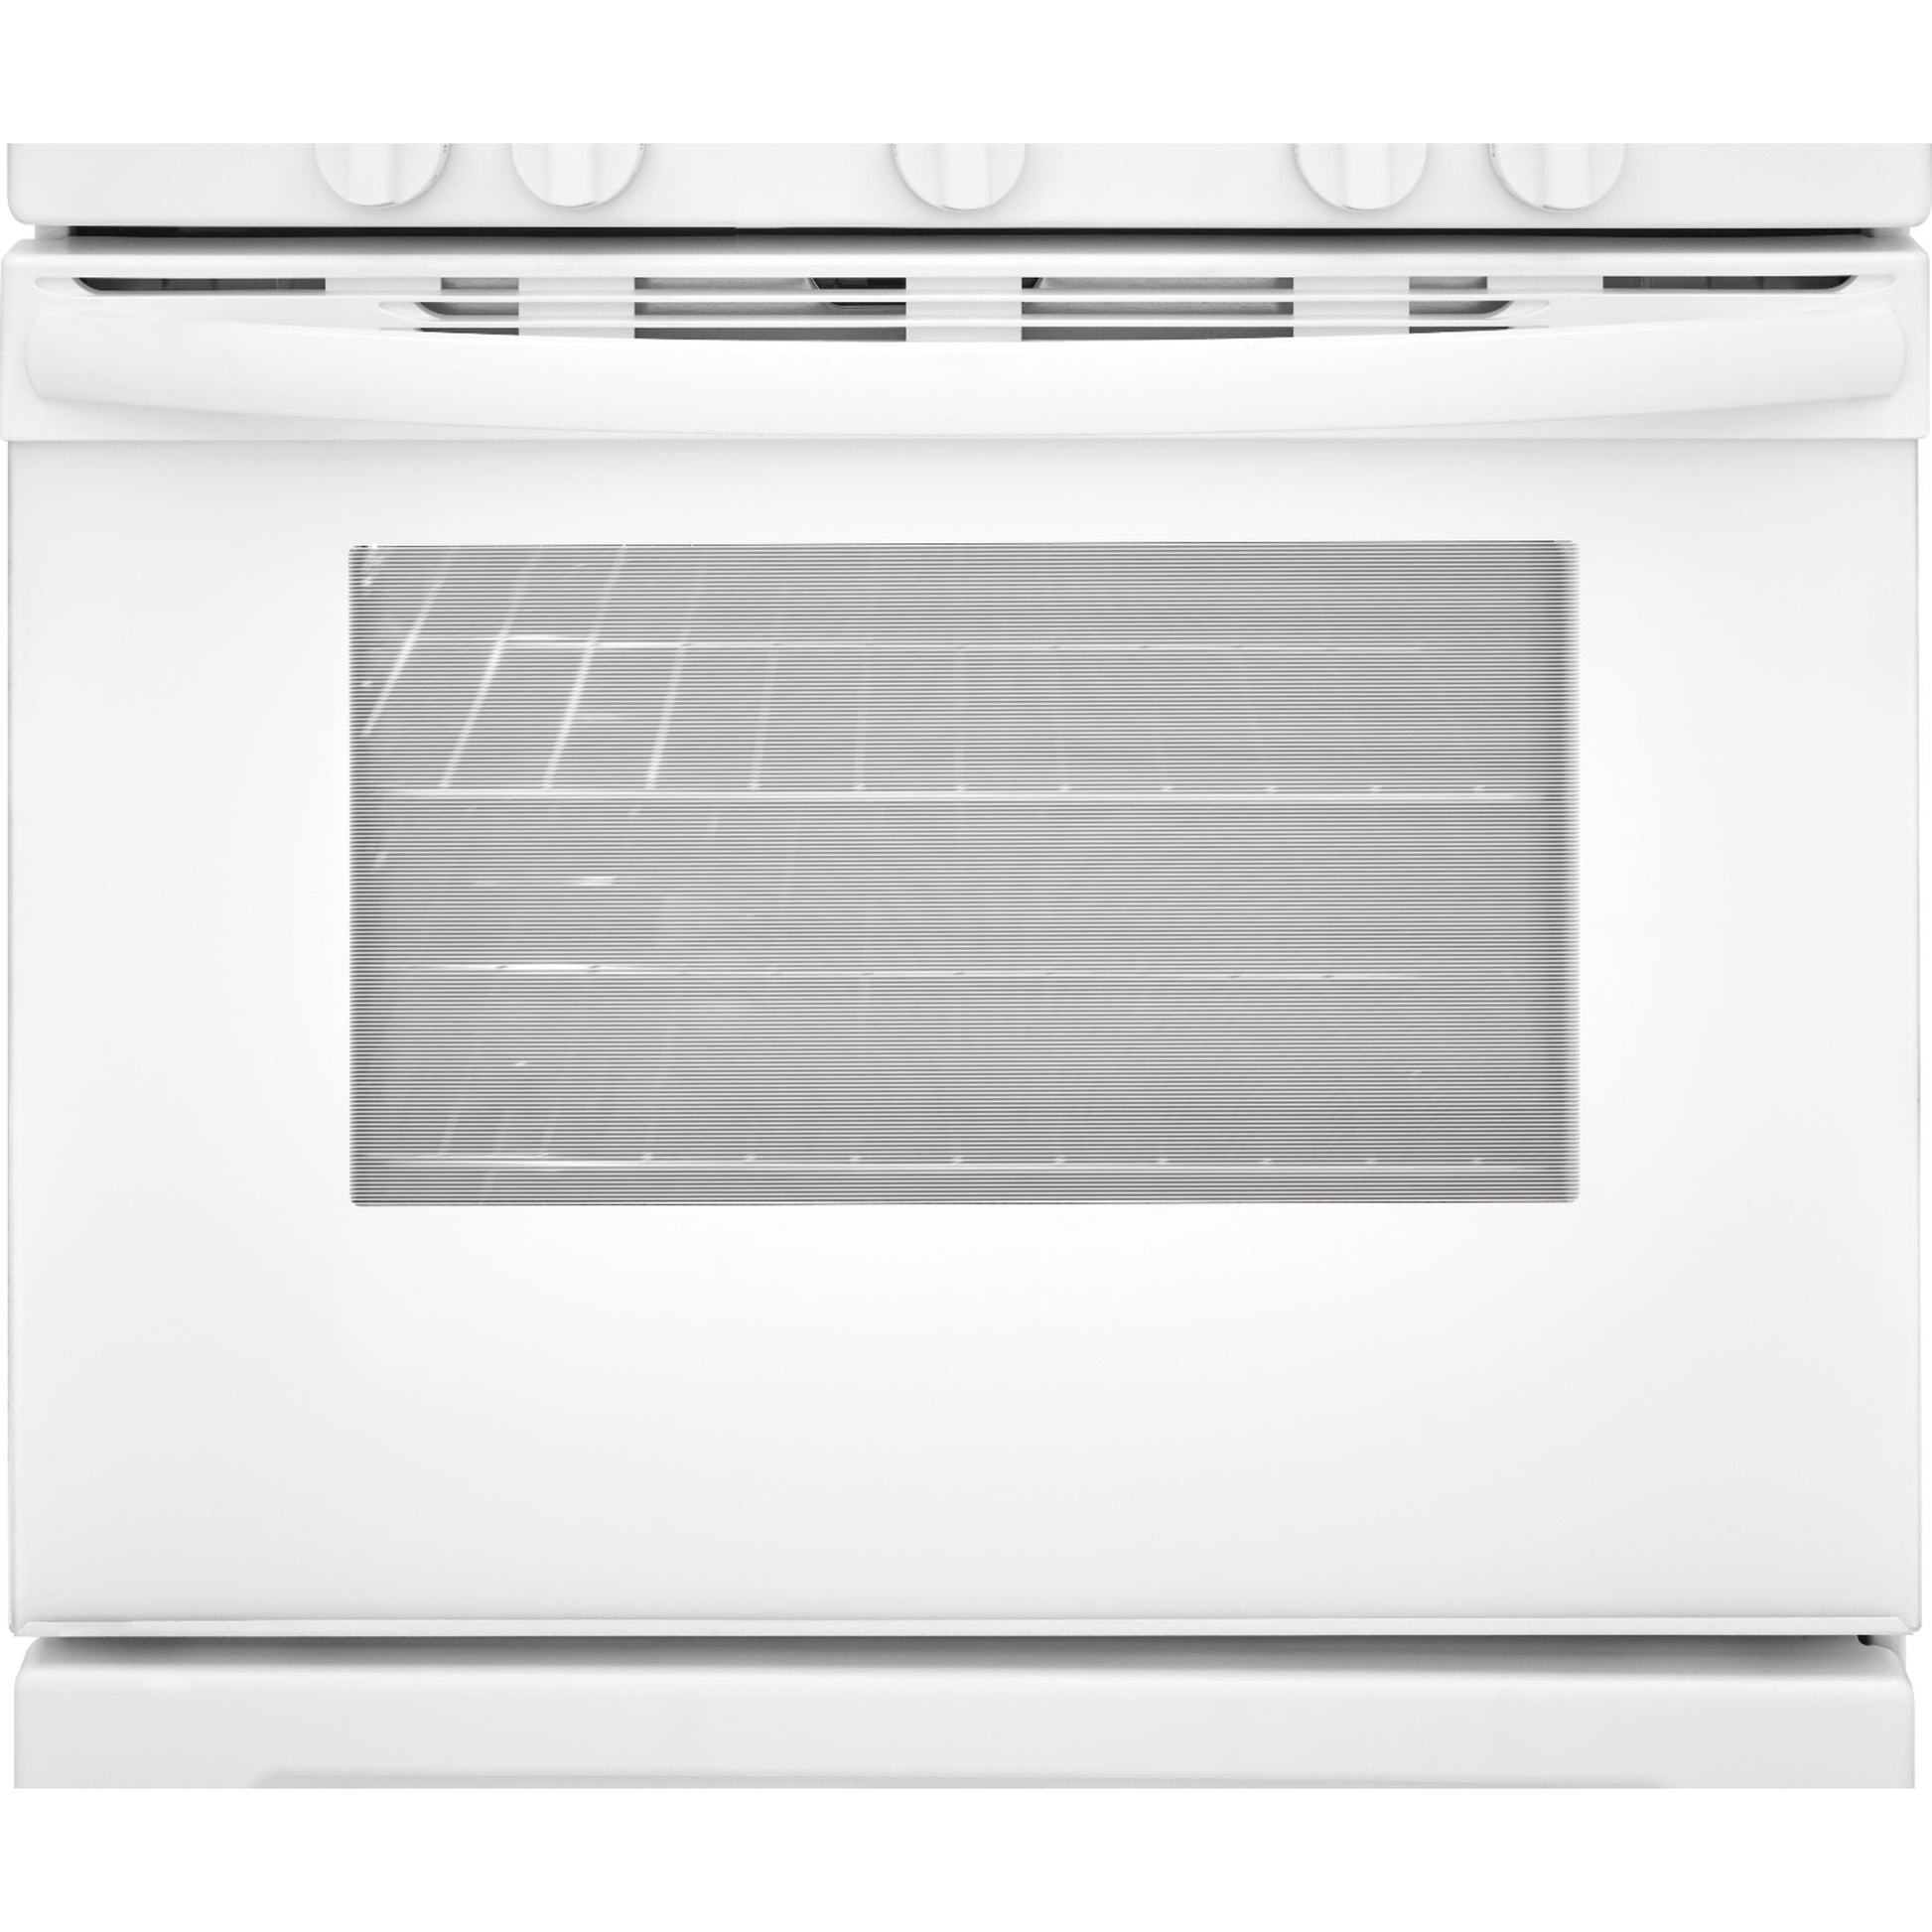 Frigidaire Gas Range (FCRG3052AS) - Stainless Steel